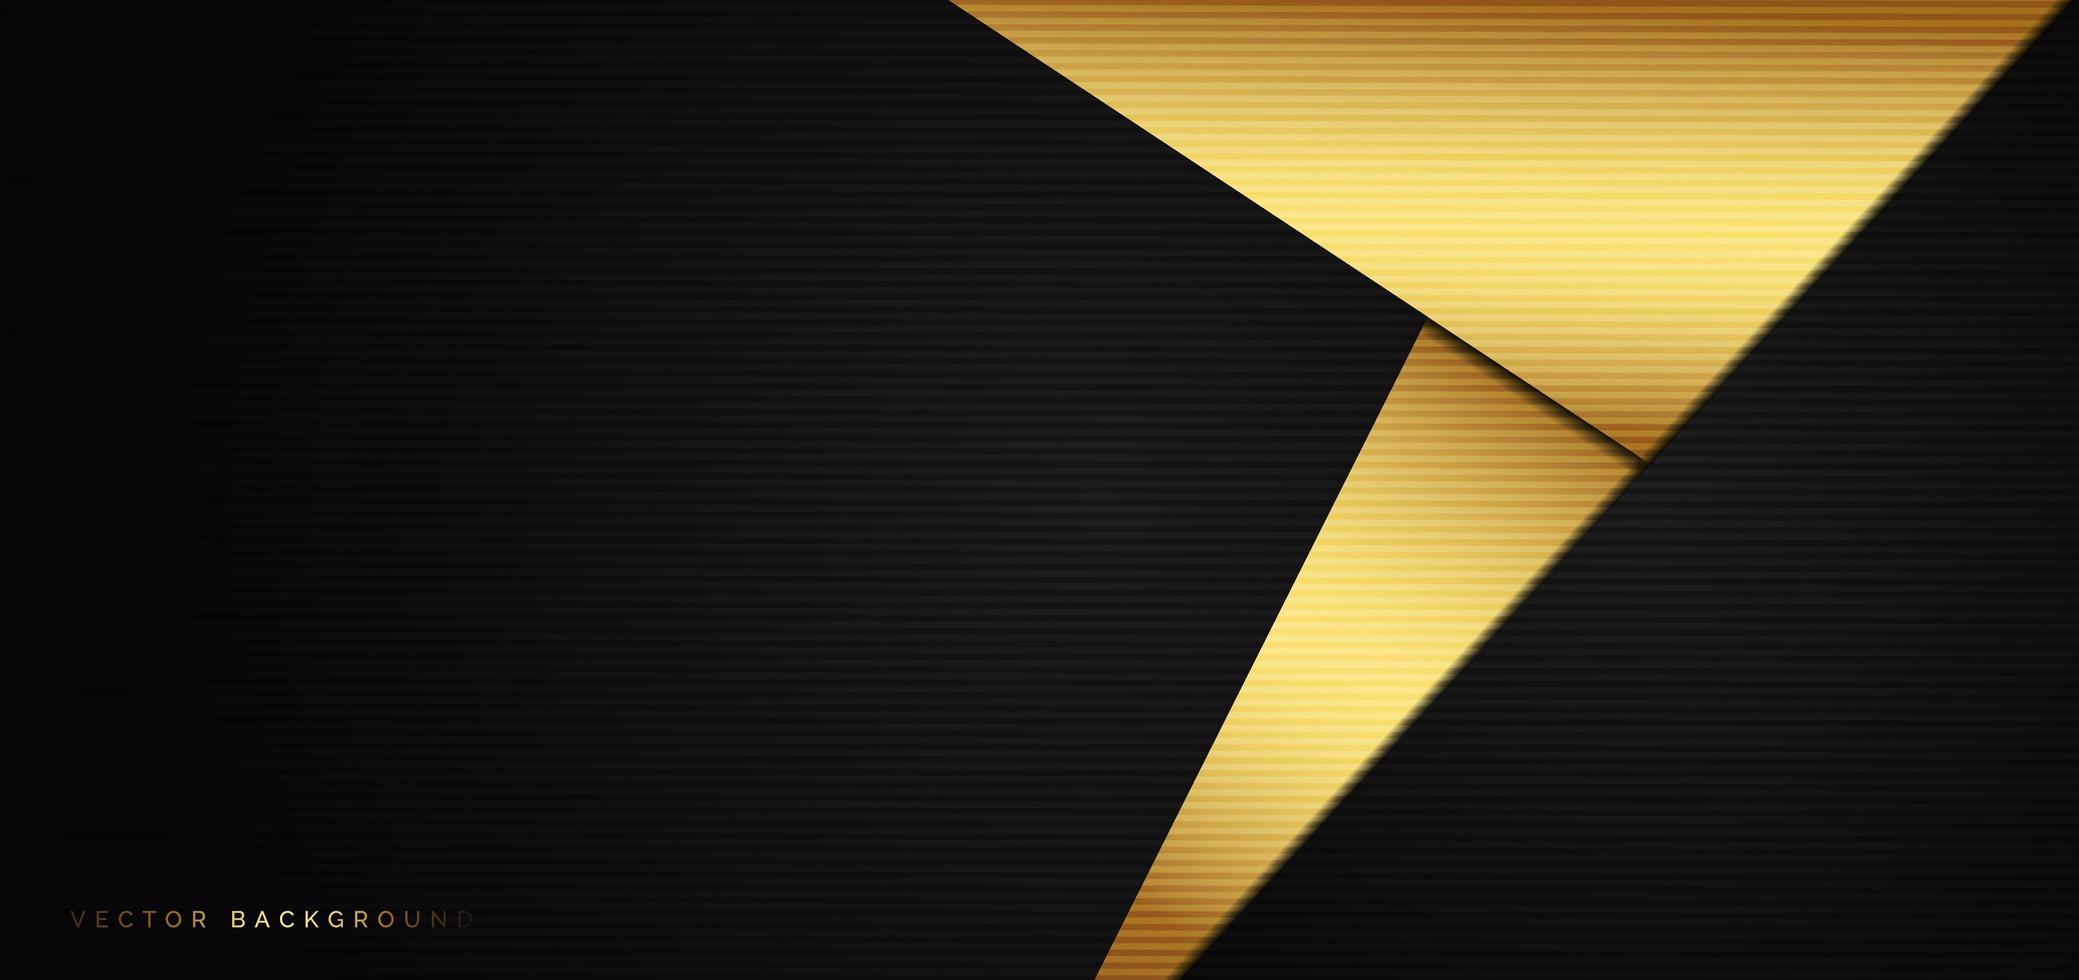 Abstract background with black and gold triangles vector